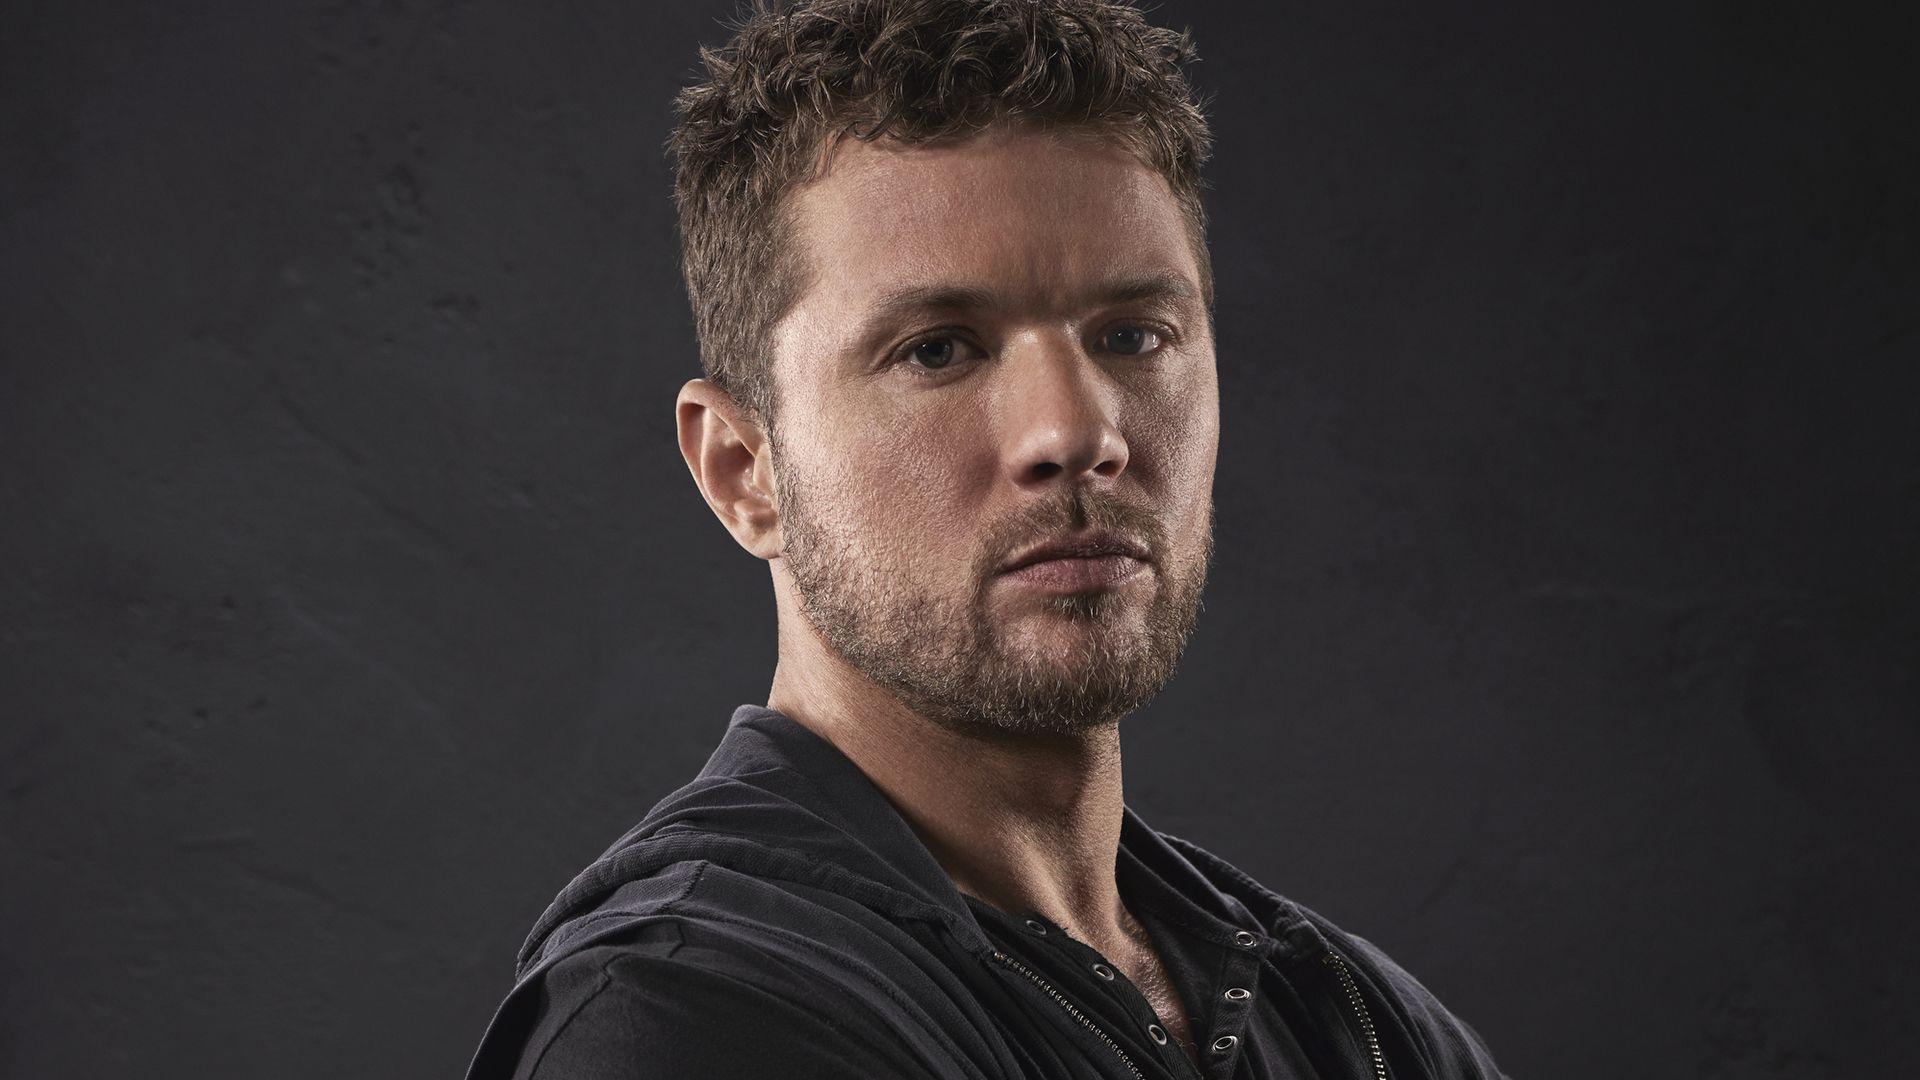 Ryan Phillippe Joins 'Hidden Heroes' to Bring Attention to